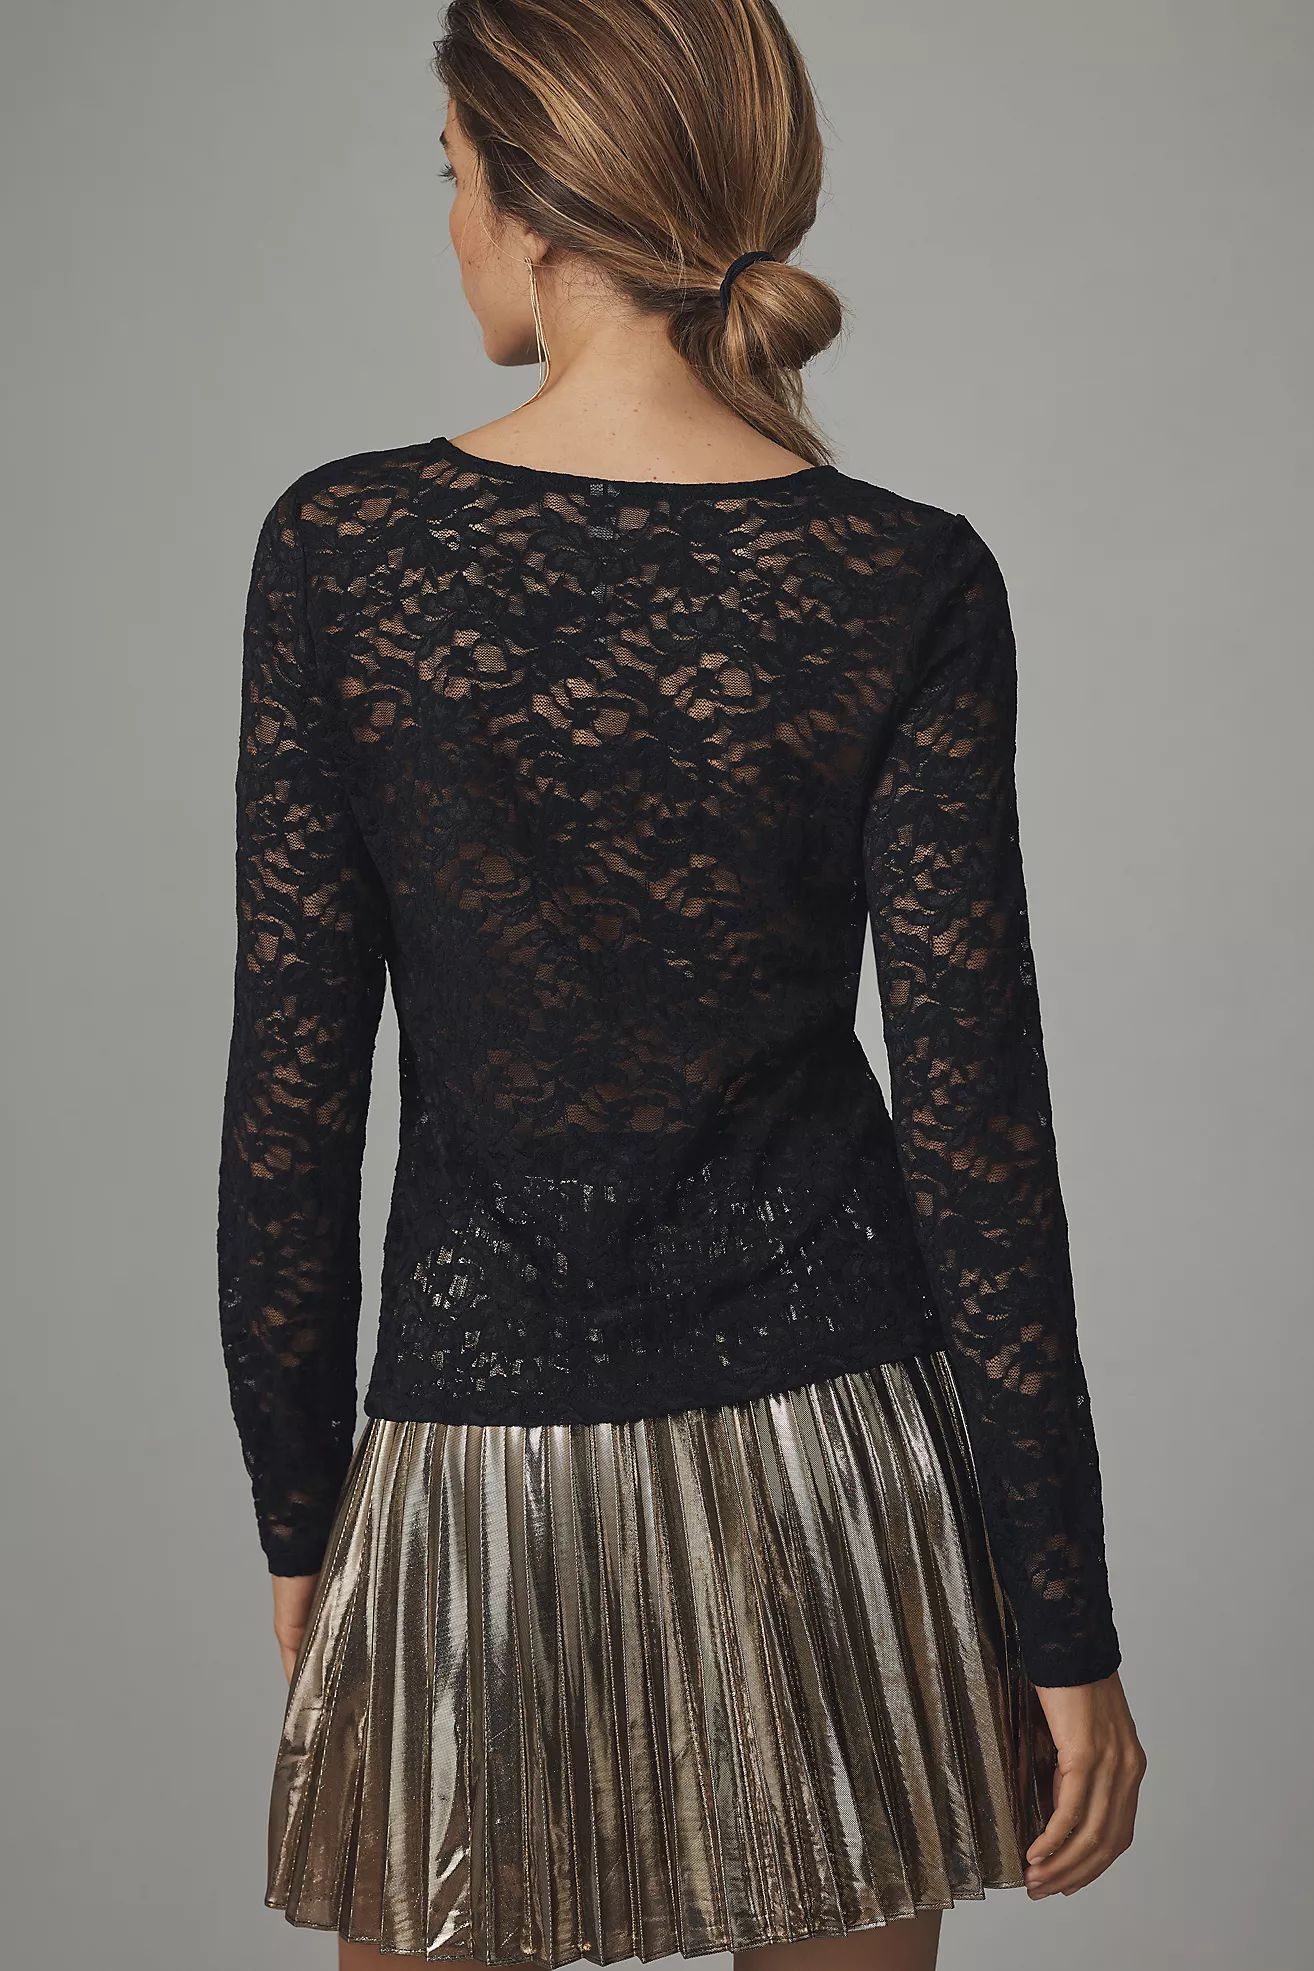 By Anthropologie Long-Sleeve Lace Crew-Neck Top | Anthropologie (US)